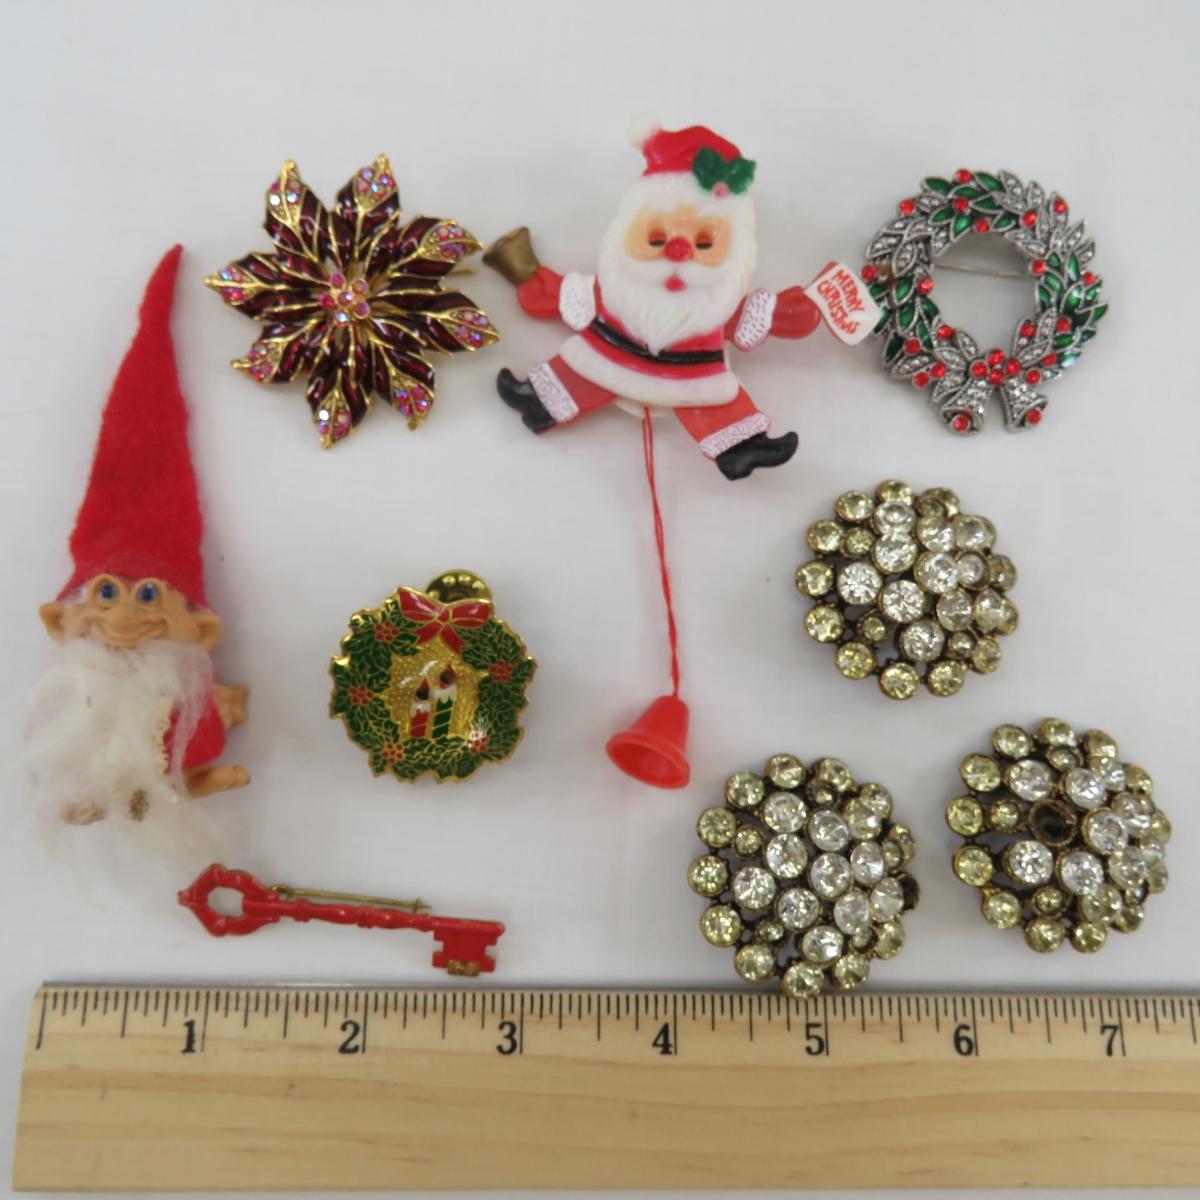 Vintage Thermoset & Christmas Jewelry - some sets